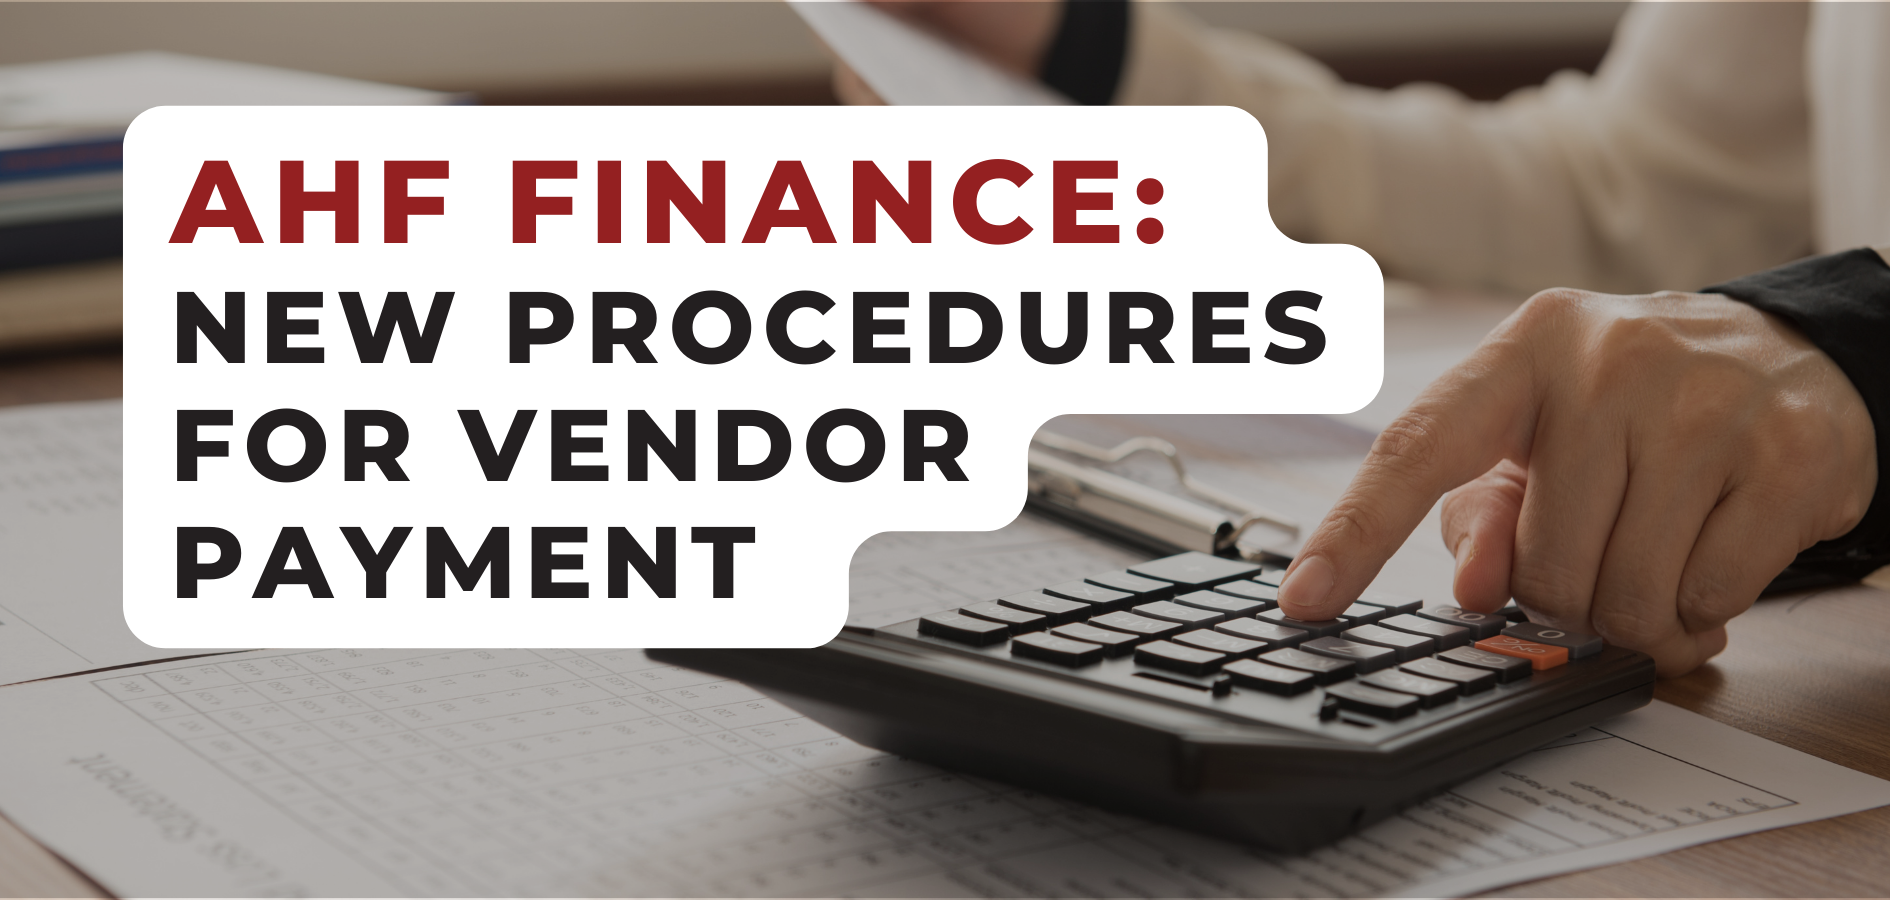 Featured image for “Updated Finance Adherence Measures”